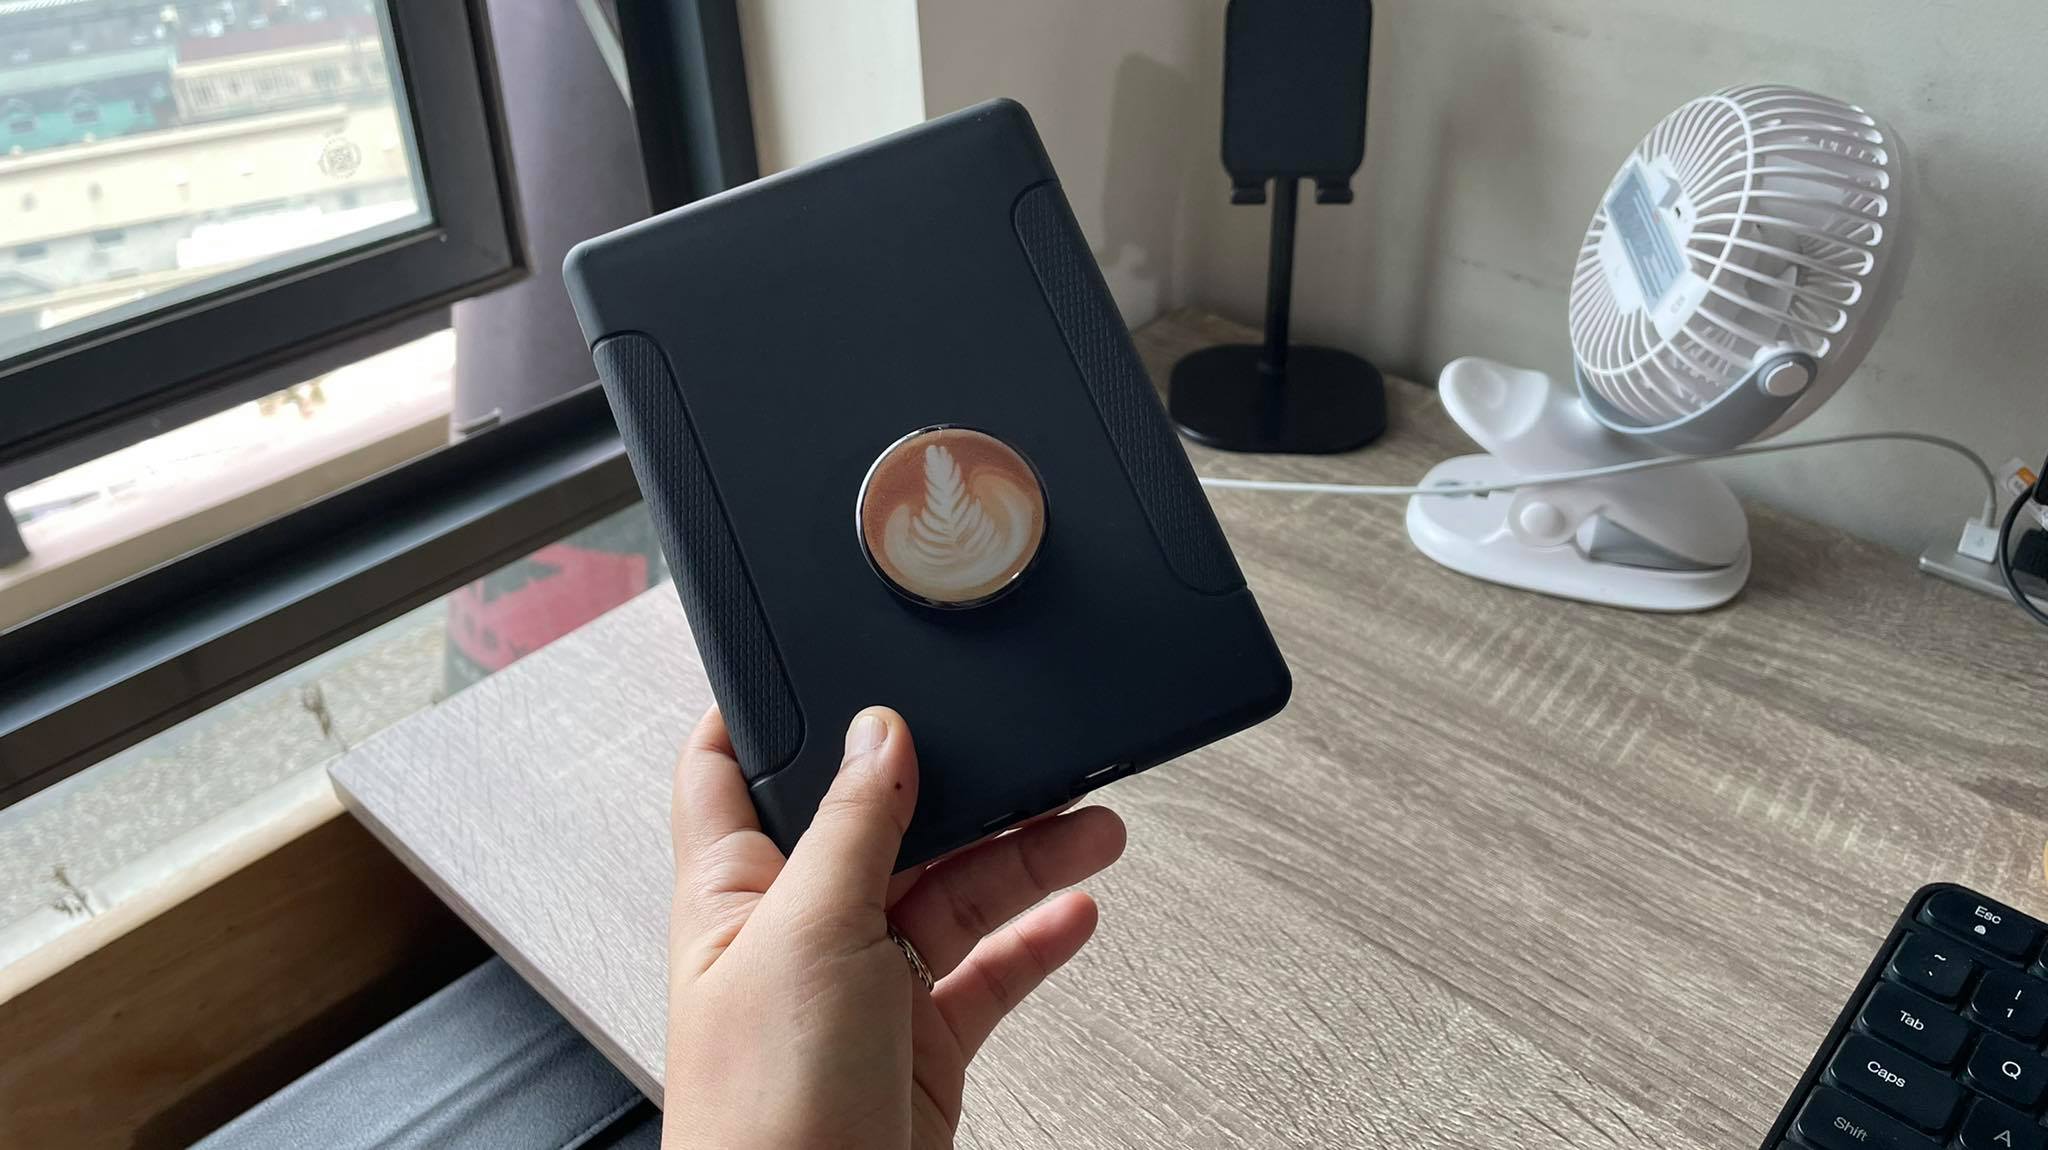 How To Hold A Popsocket With An iPad